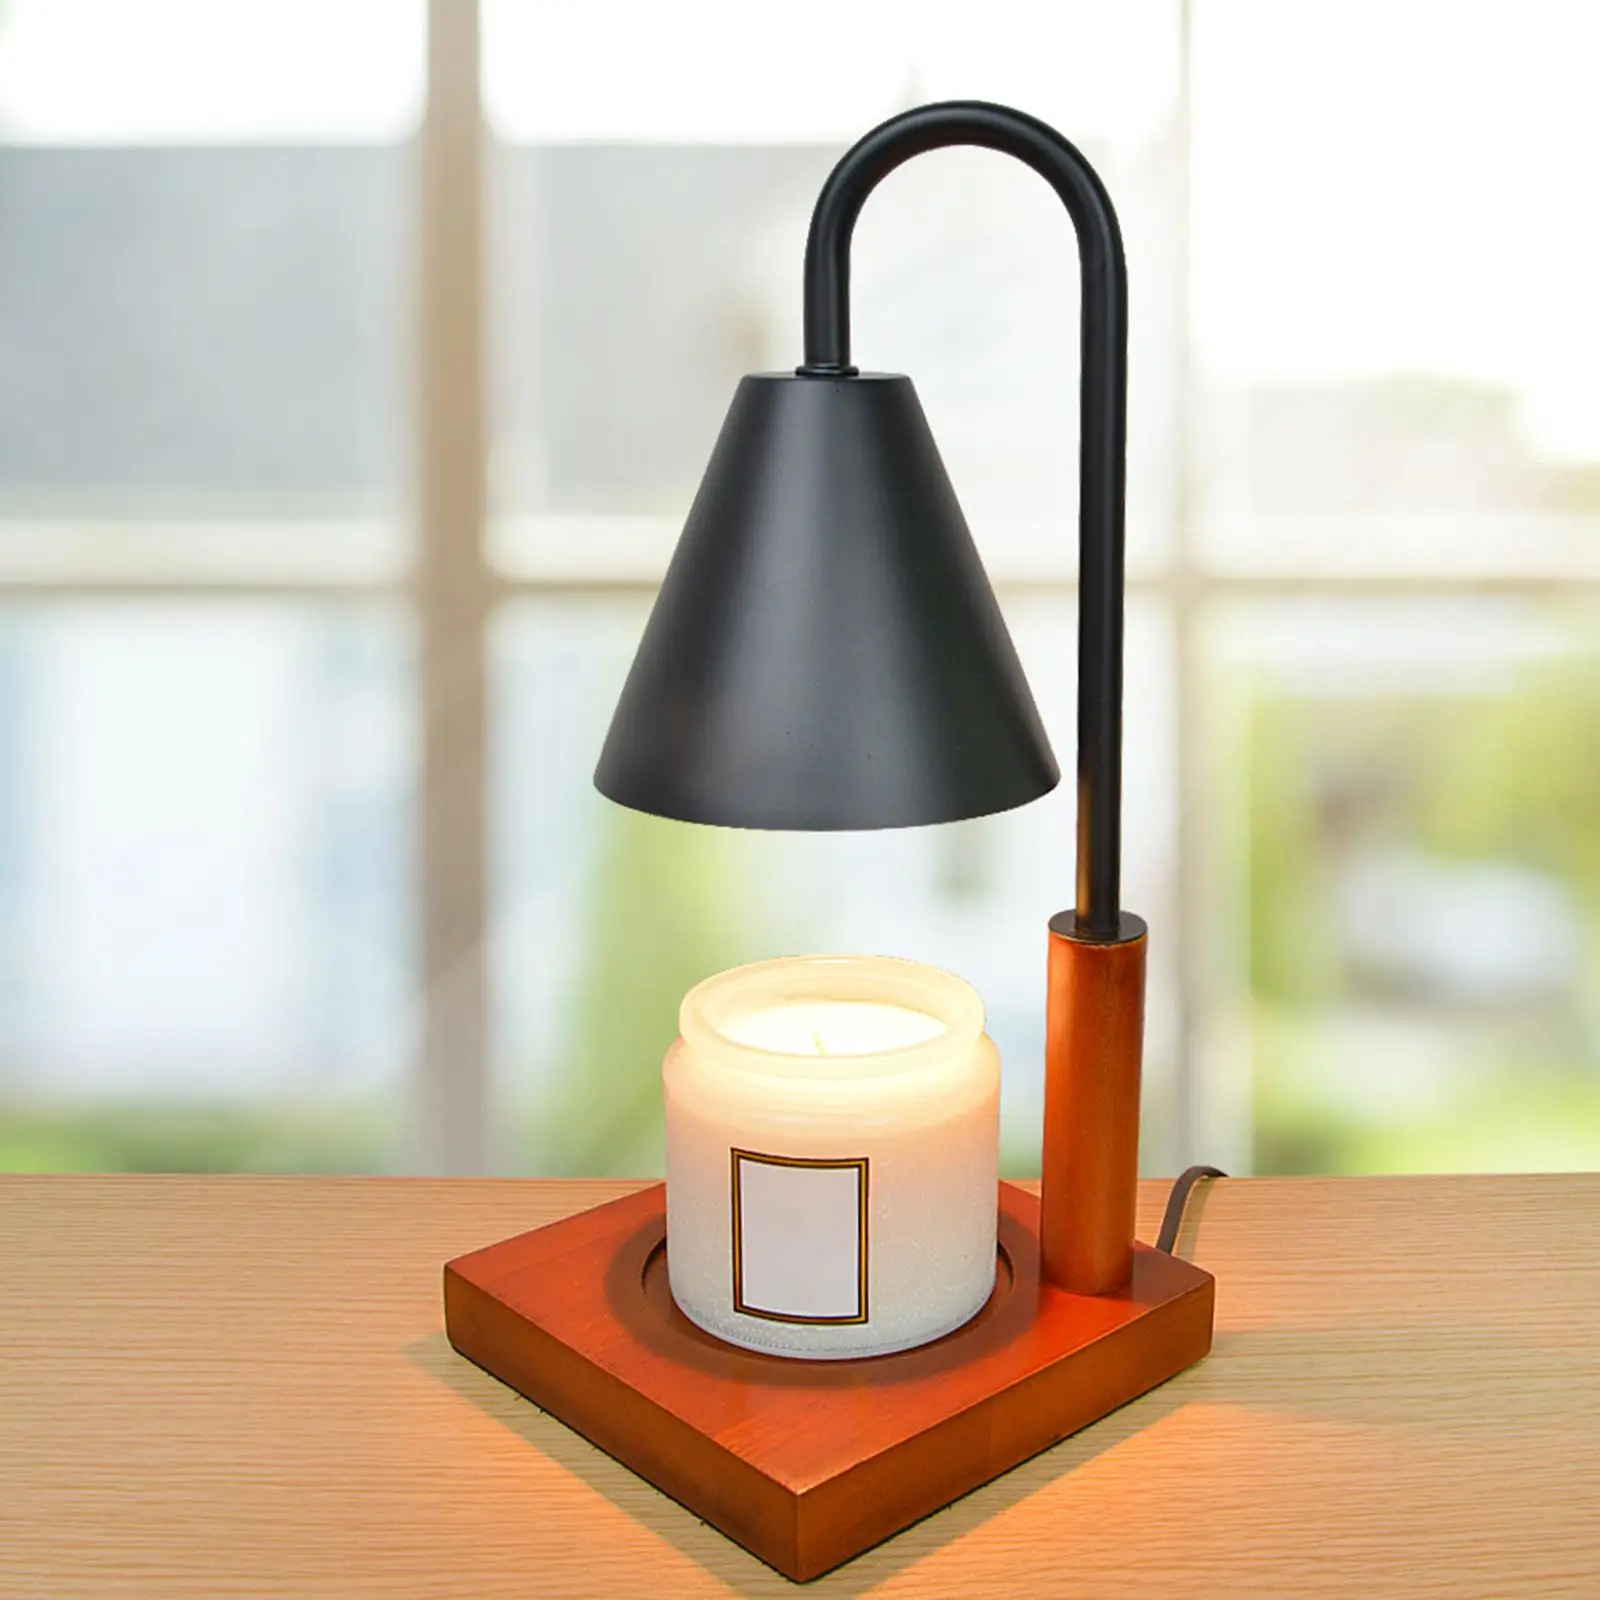 Candle Wax Melting Light Bedside Lights Dimmable Candle Warmer Lamp for Living Room